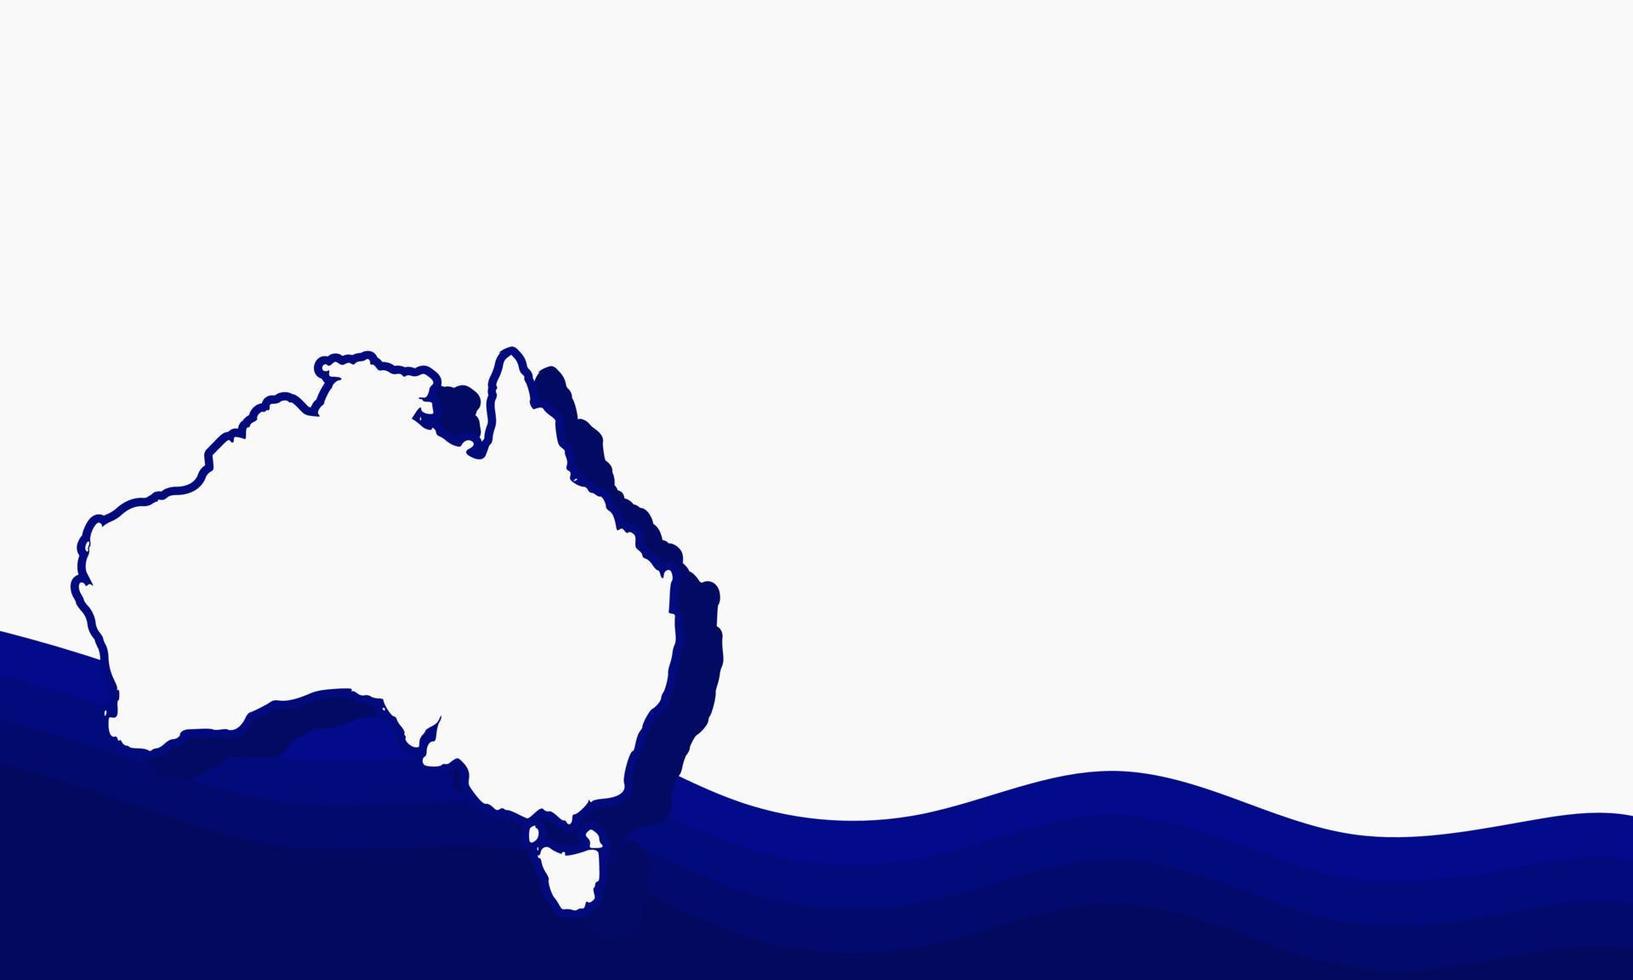 Background Australia Day vector illustration, and Copy Space Area. Suitable to be placed on content with that theme.